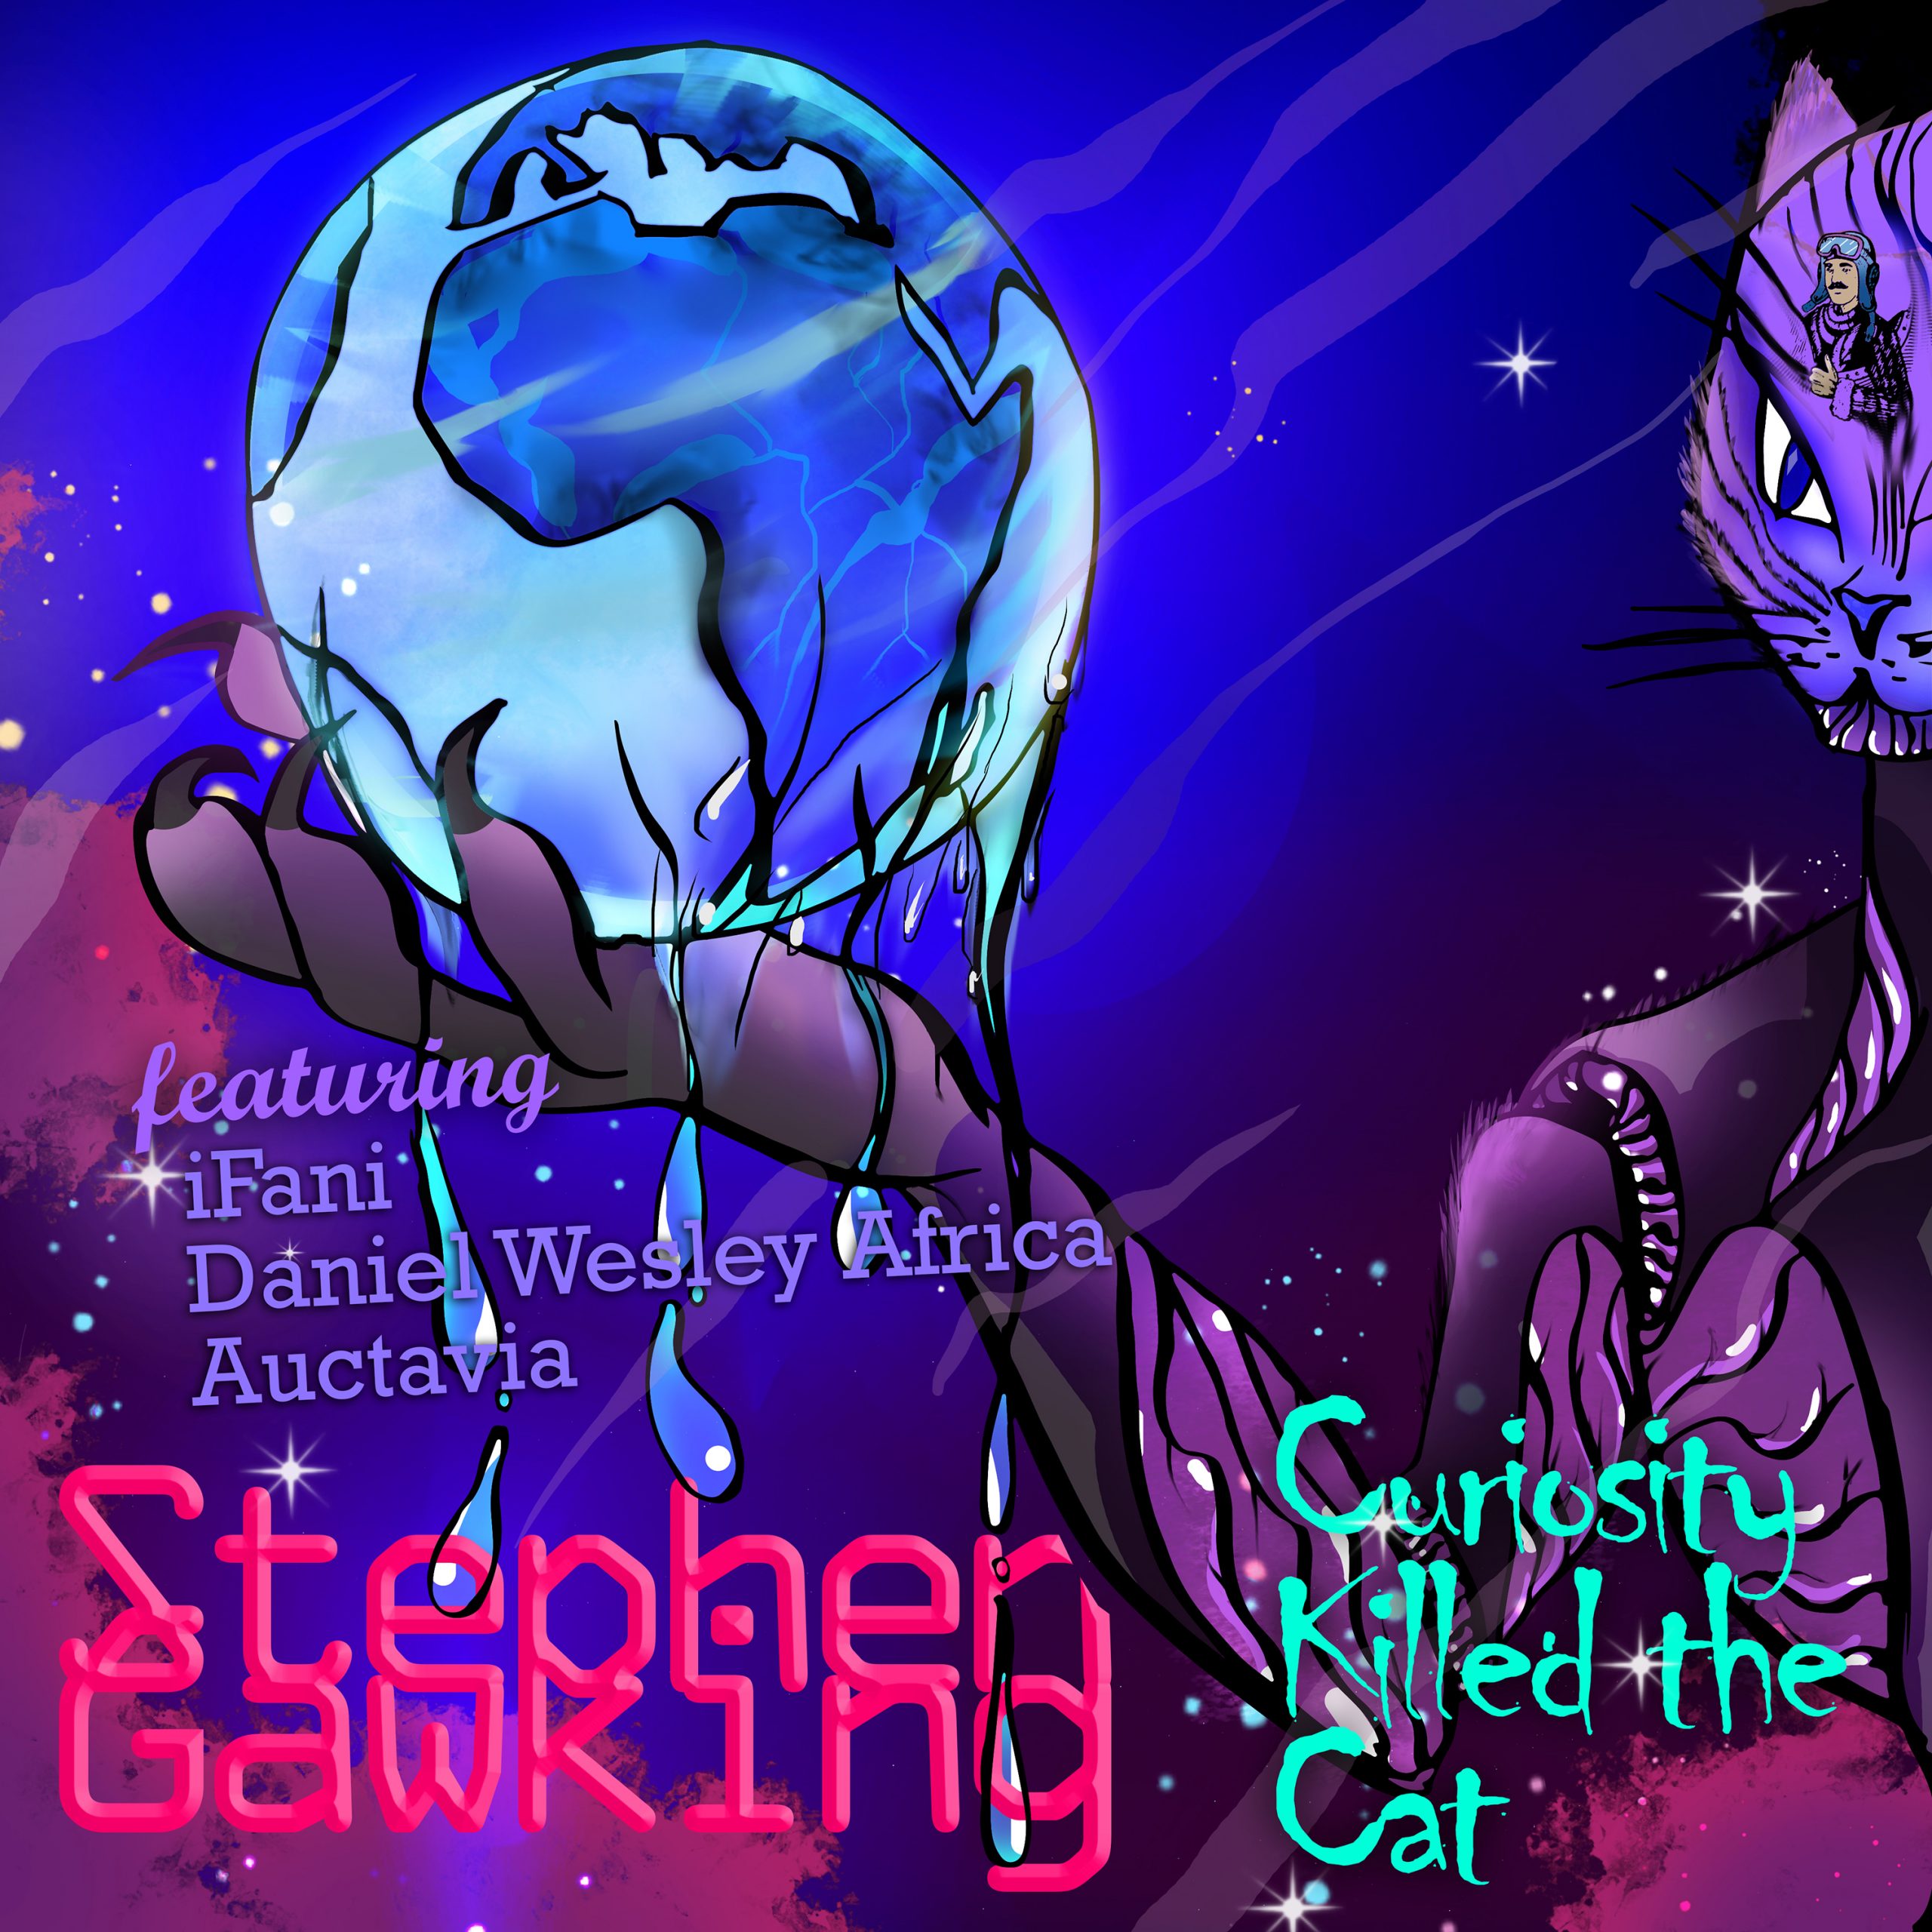 Stephen Gawking returns with 3rd single ‘Curiosity Killed the Cat’ featuring Hip Hop star iFani, Daniel Wesley Africa & Auctavia